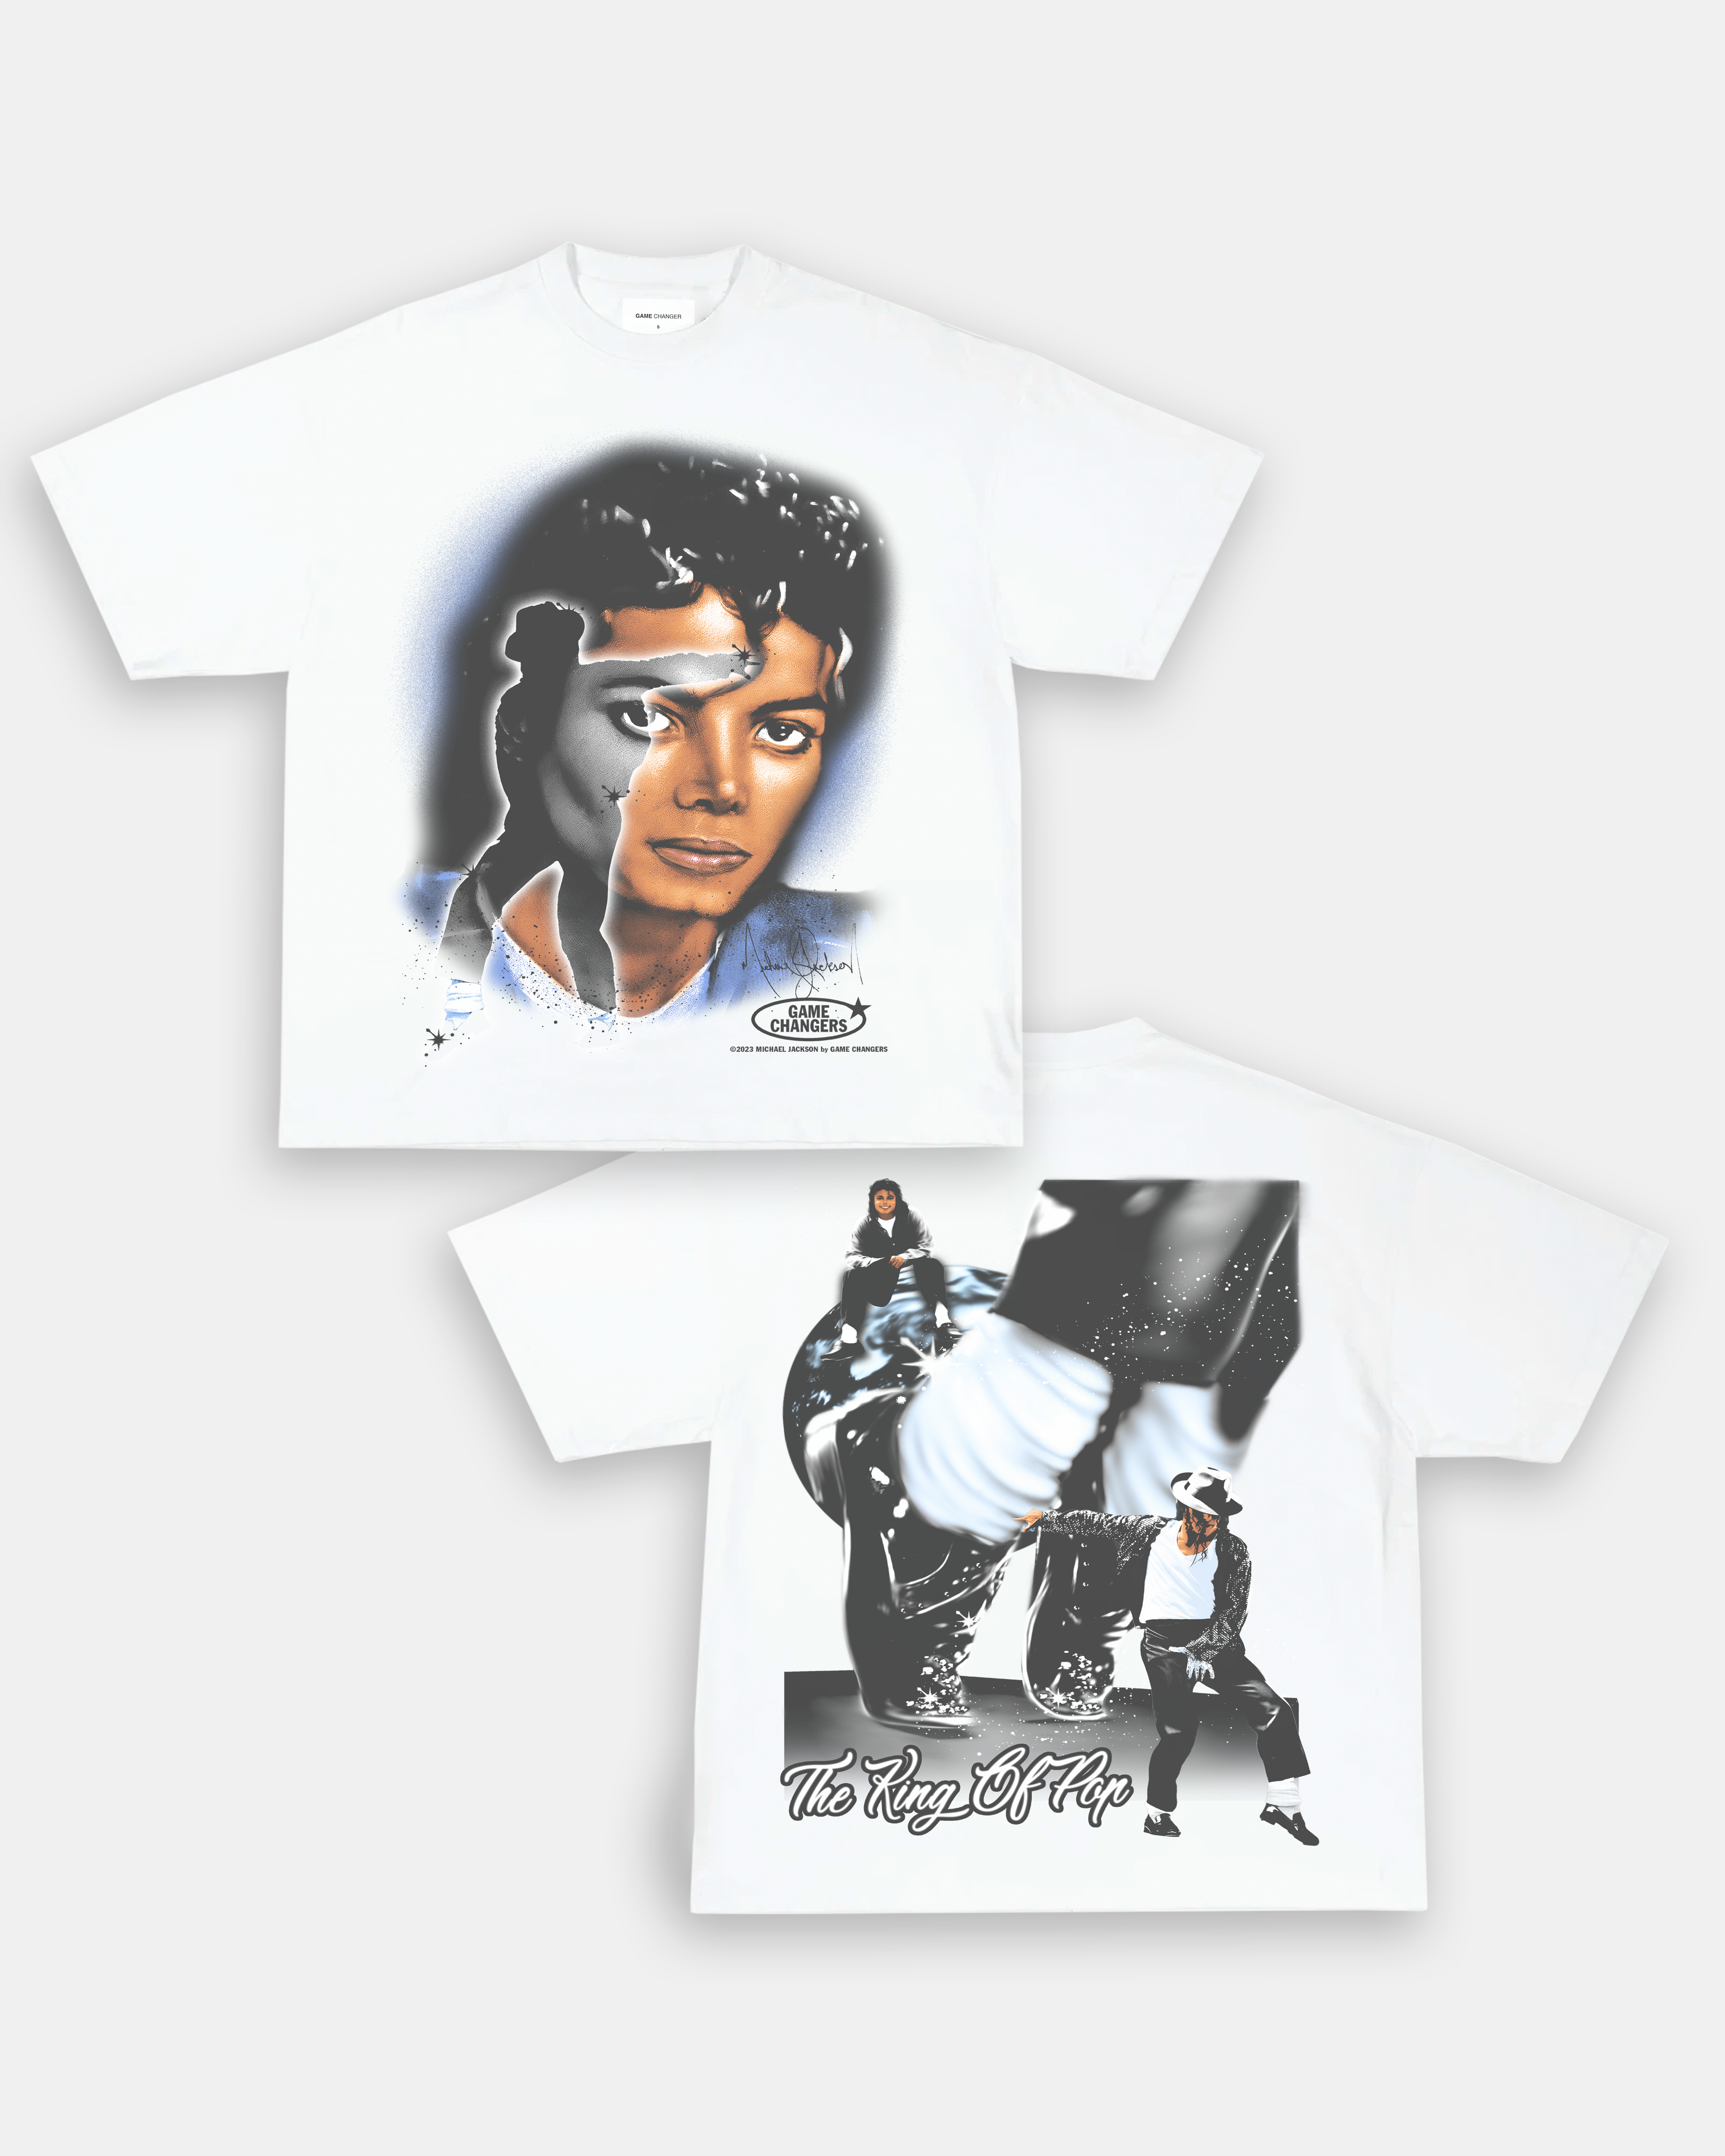 ALLWINS MJ TEE - [DS] – GAME CHANGERS